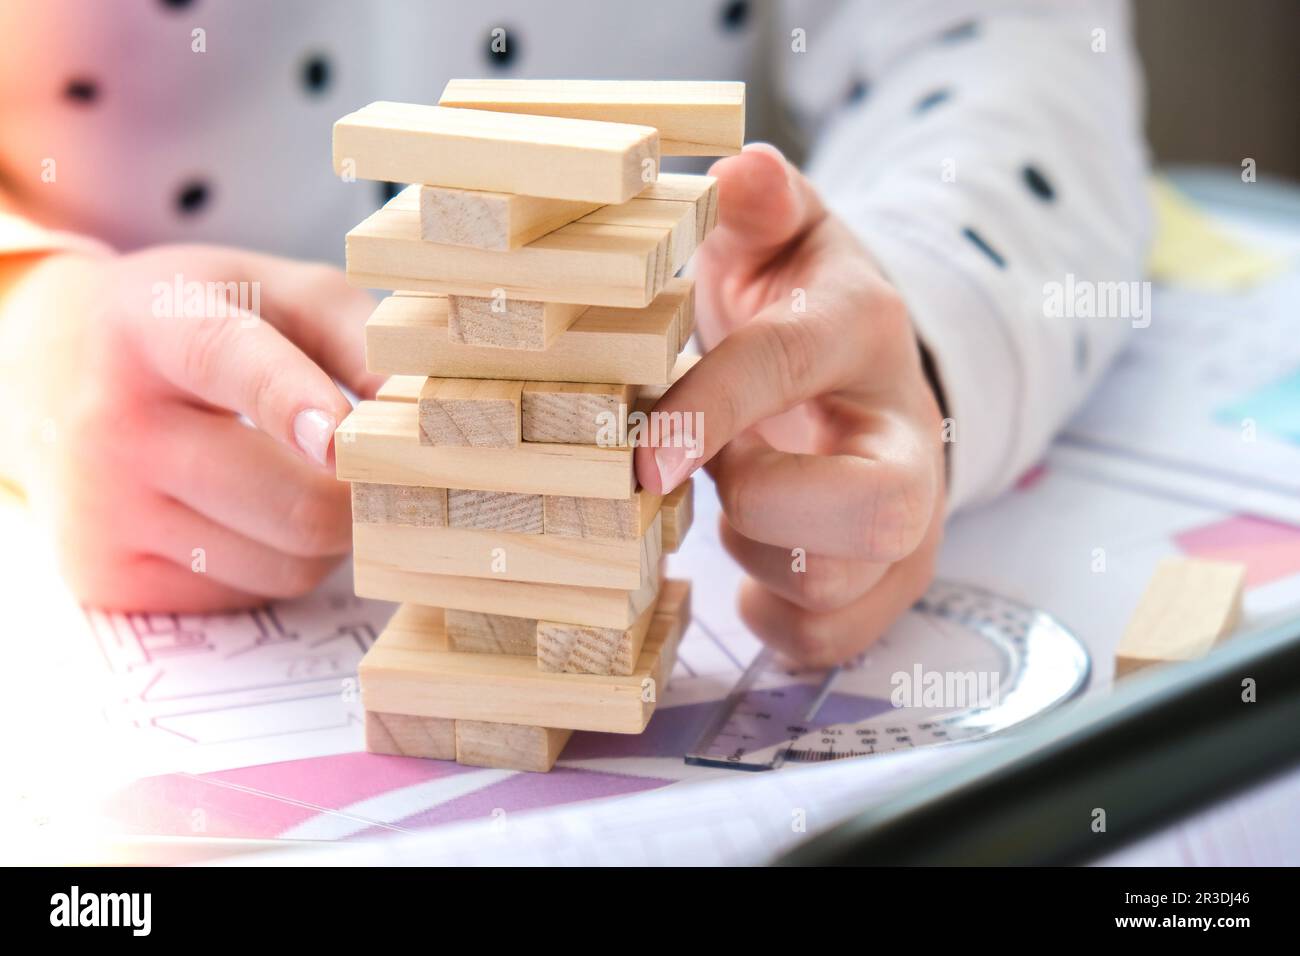 Architect designer Interior creative working hand playing a block wood game on desk architectural plan of the house, a color pal Stock Photo